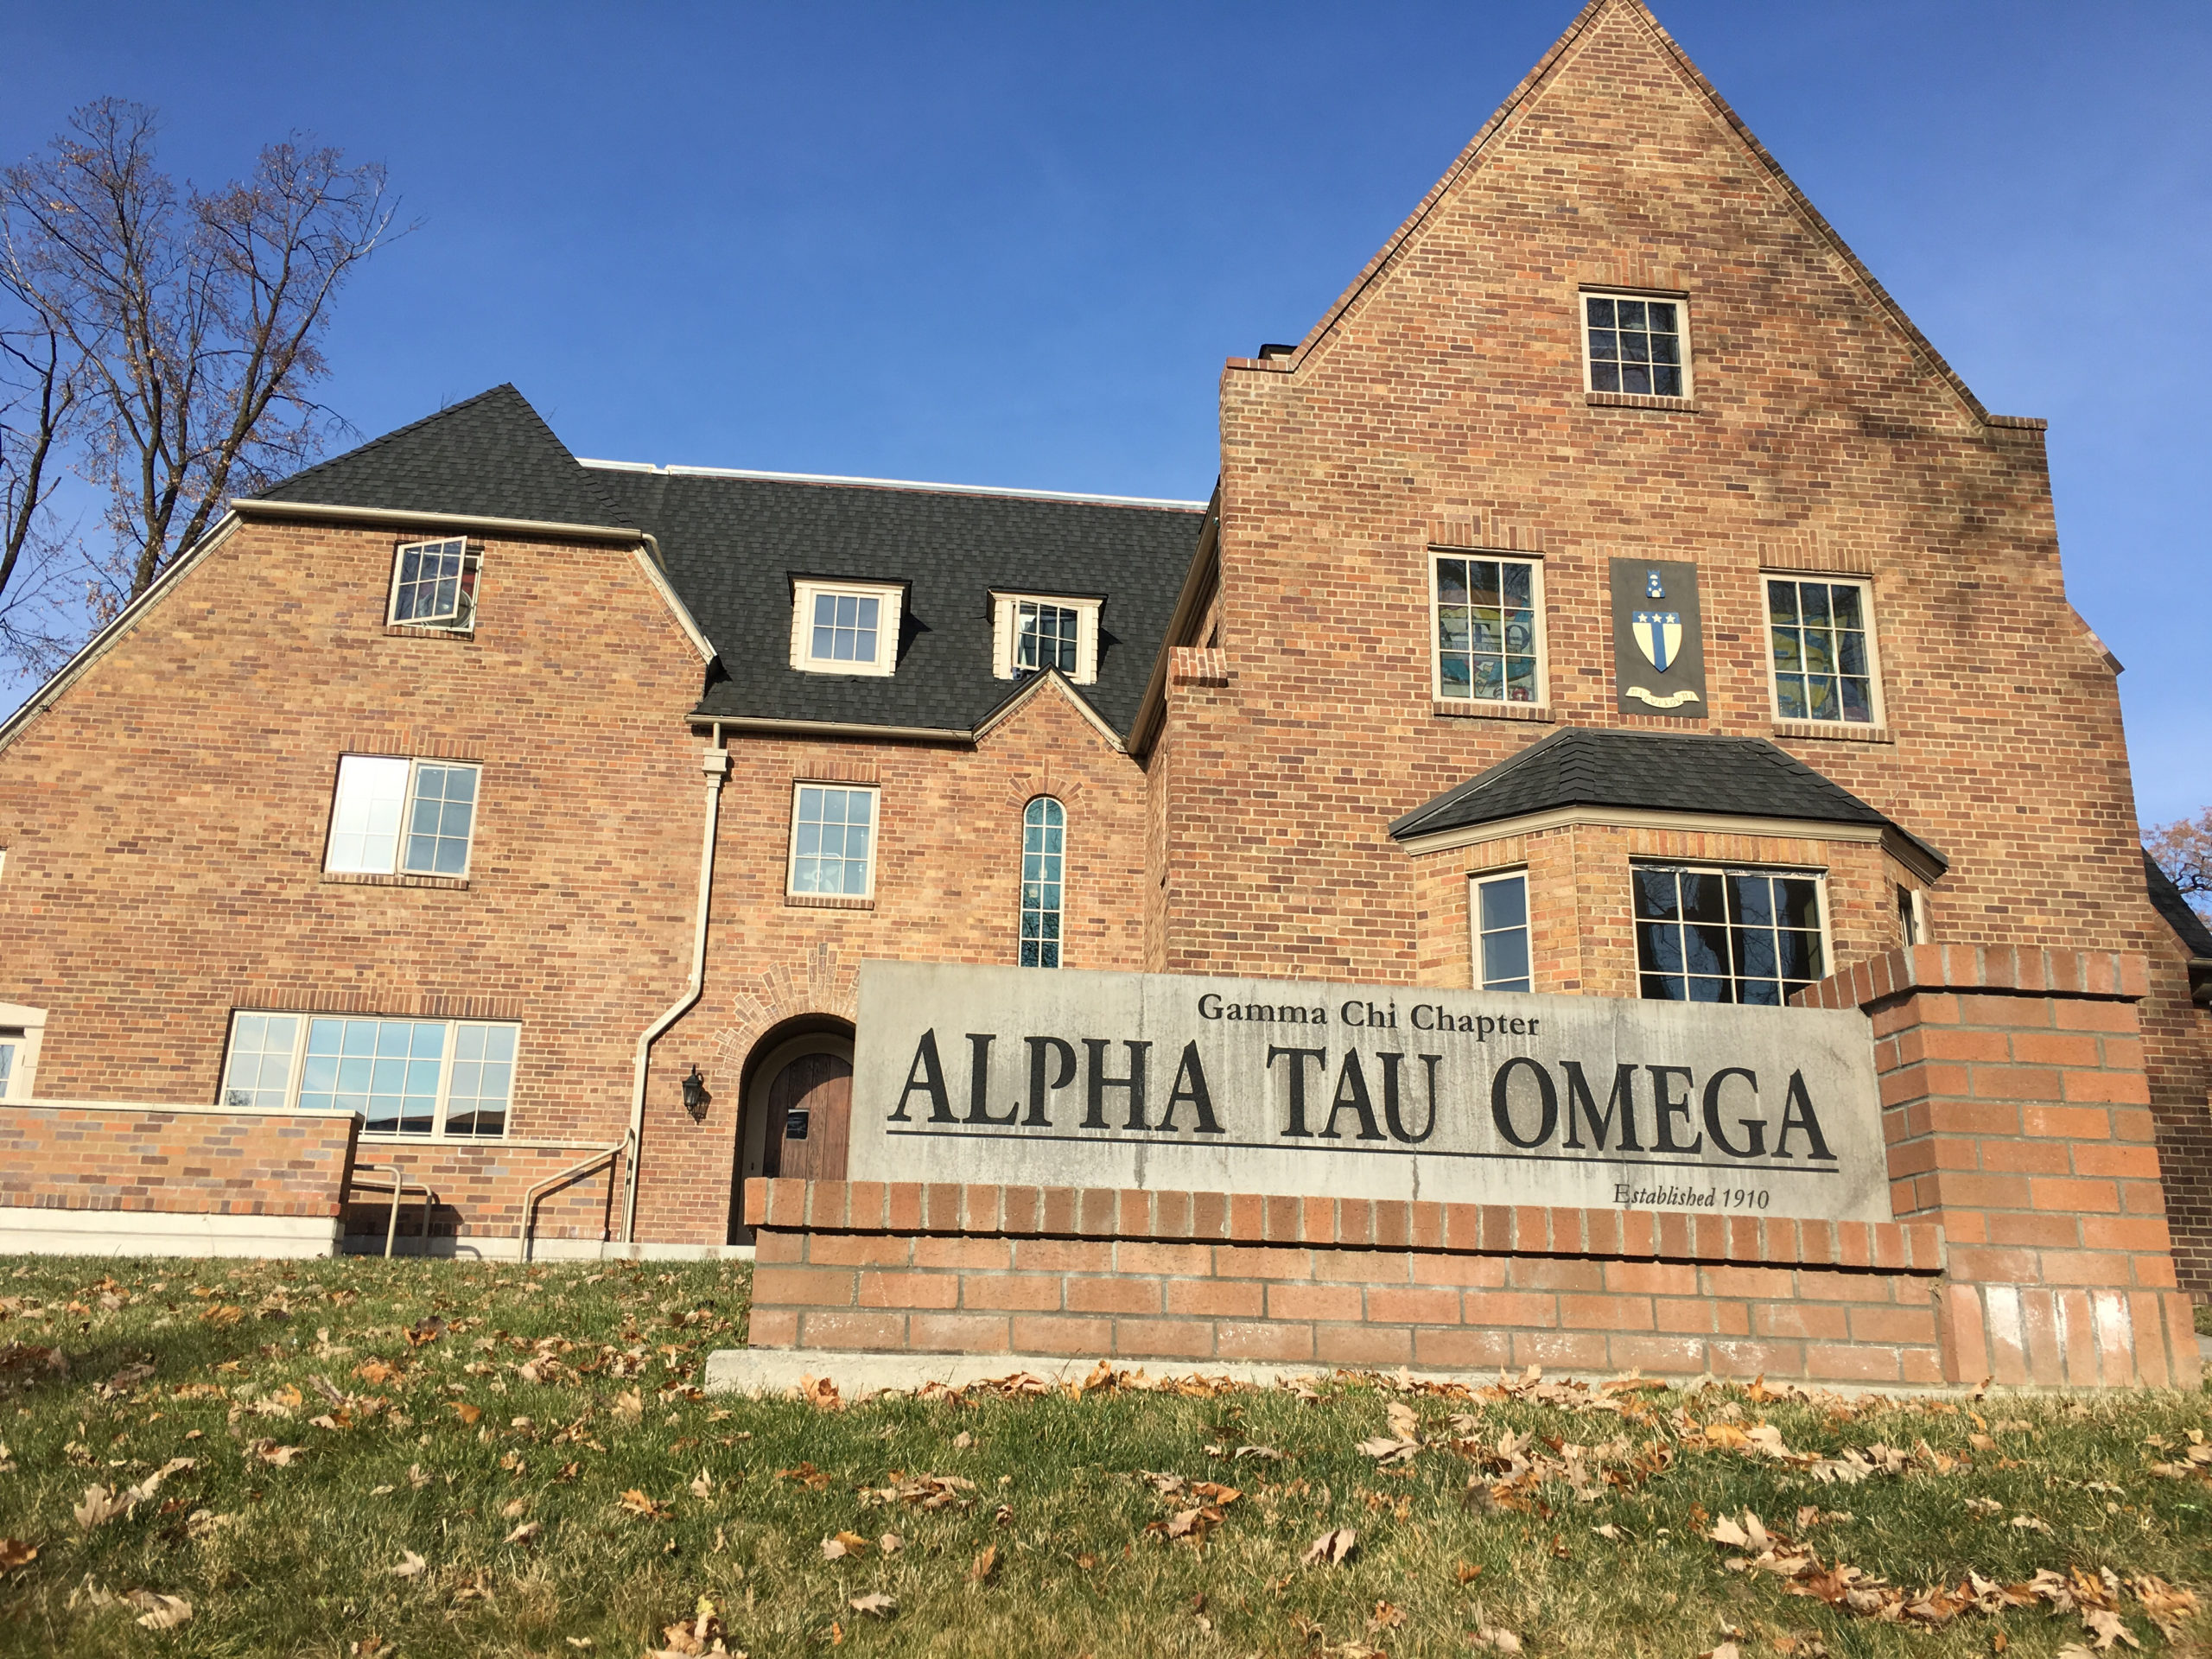 Photo of the Alpha Tau Omega fraternity house at Washington State University in Pullman